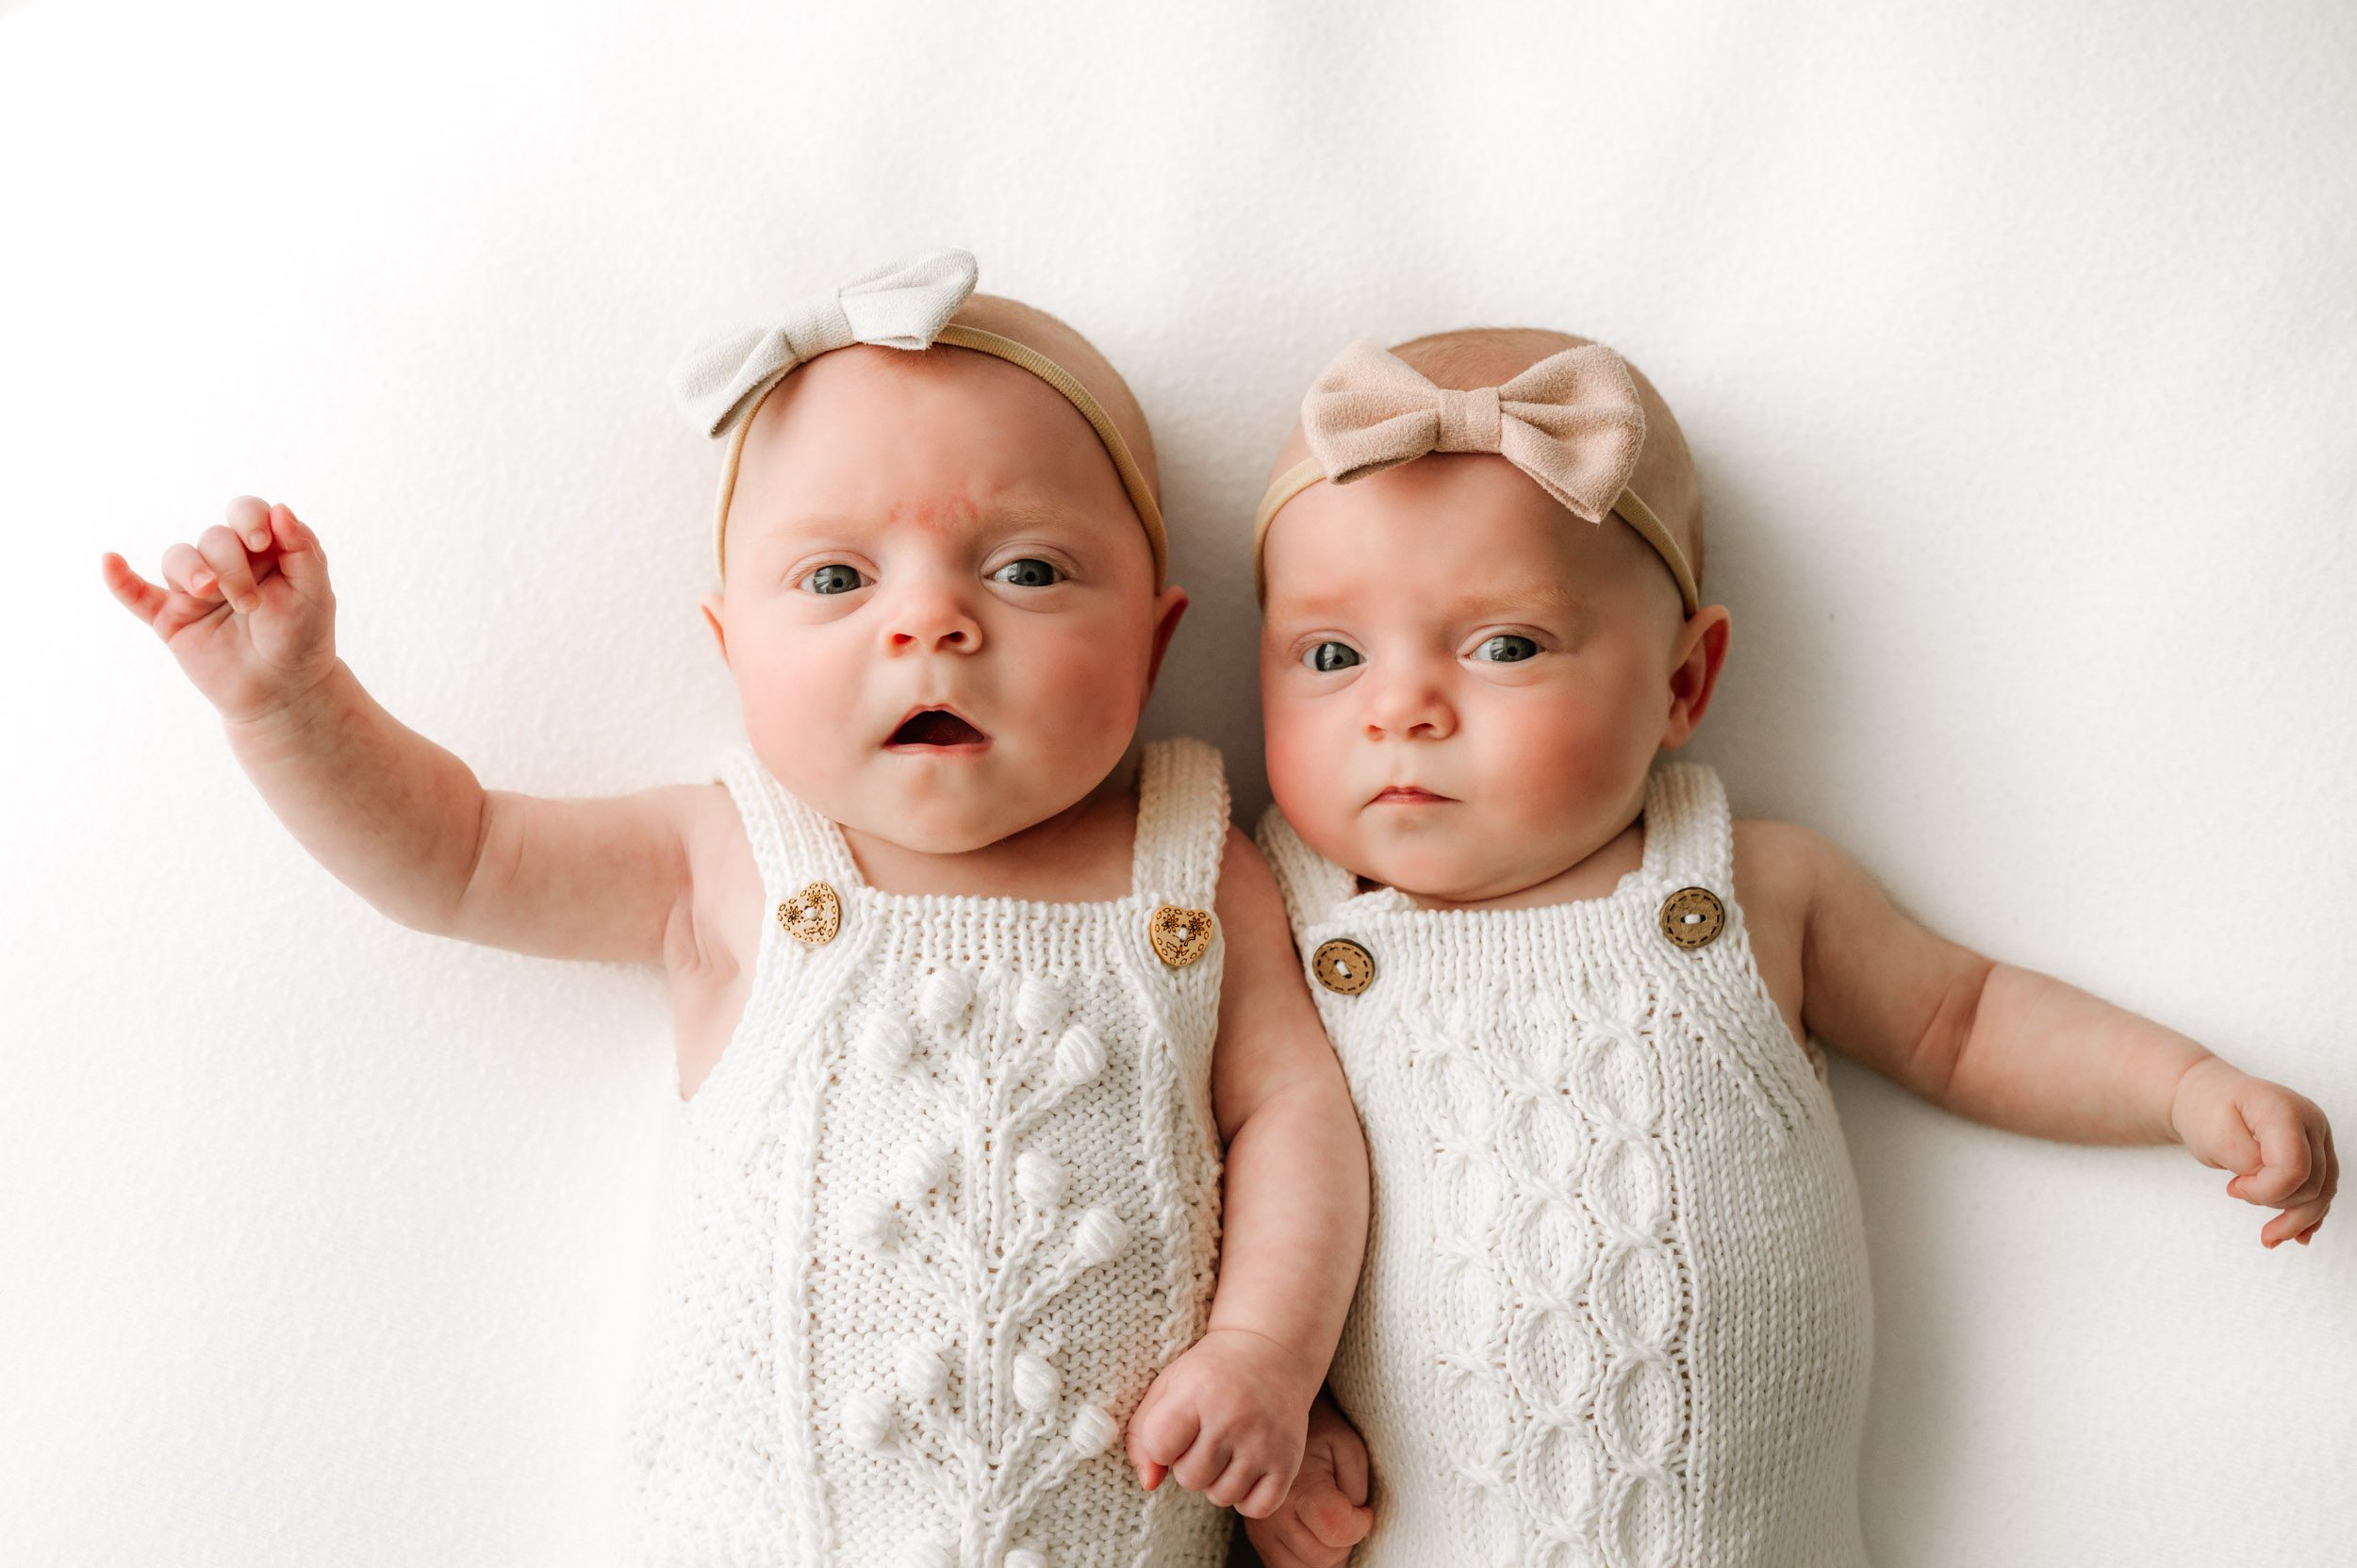 twin baby girls wearing textured white knit rompers laying on a white backdrop and looking right at the camera during a newborn photoshoot